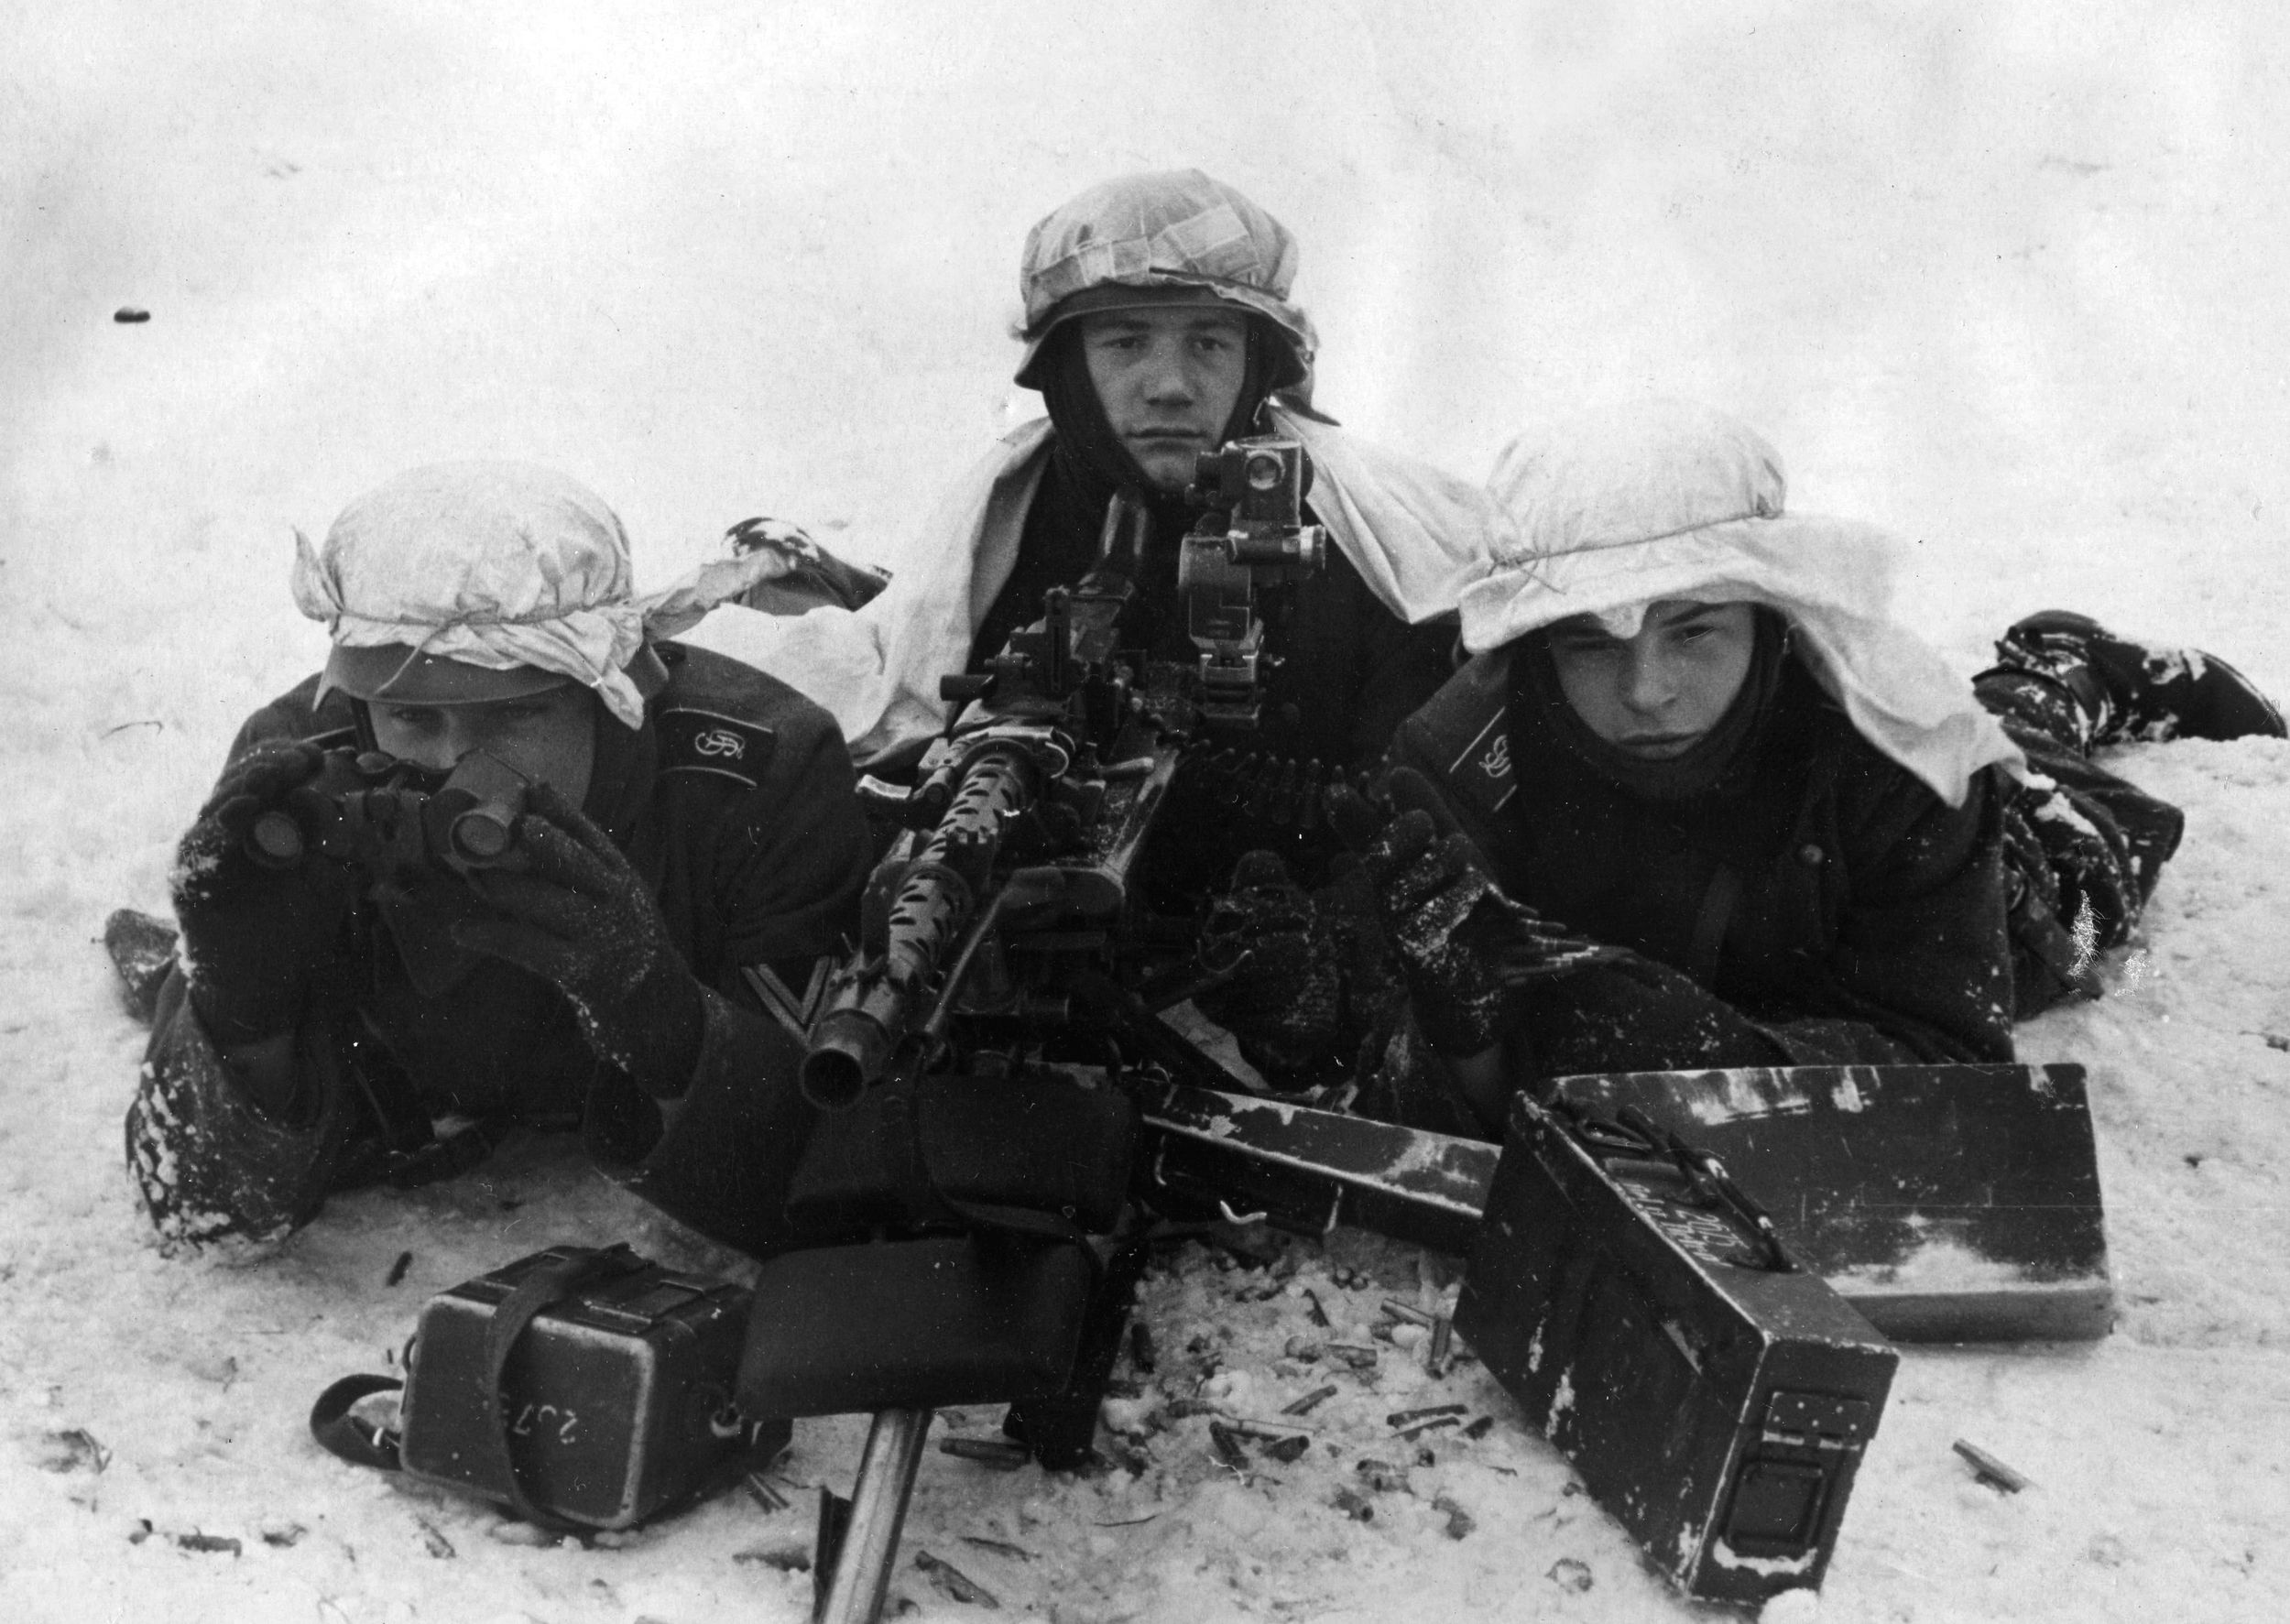 A German machine gun crew of the Grossdeutschland (Greater Germany) Regiment awaits a Red Army attack.  This trio appears to have commandeered white bedsheets for use as camouflage.